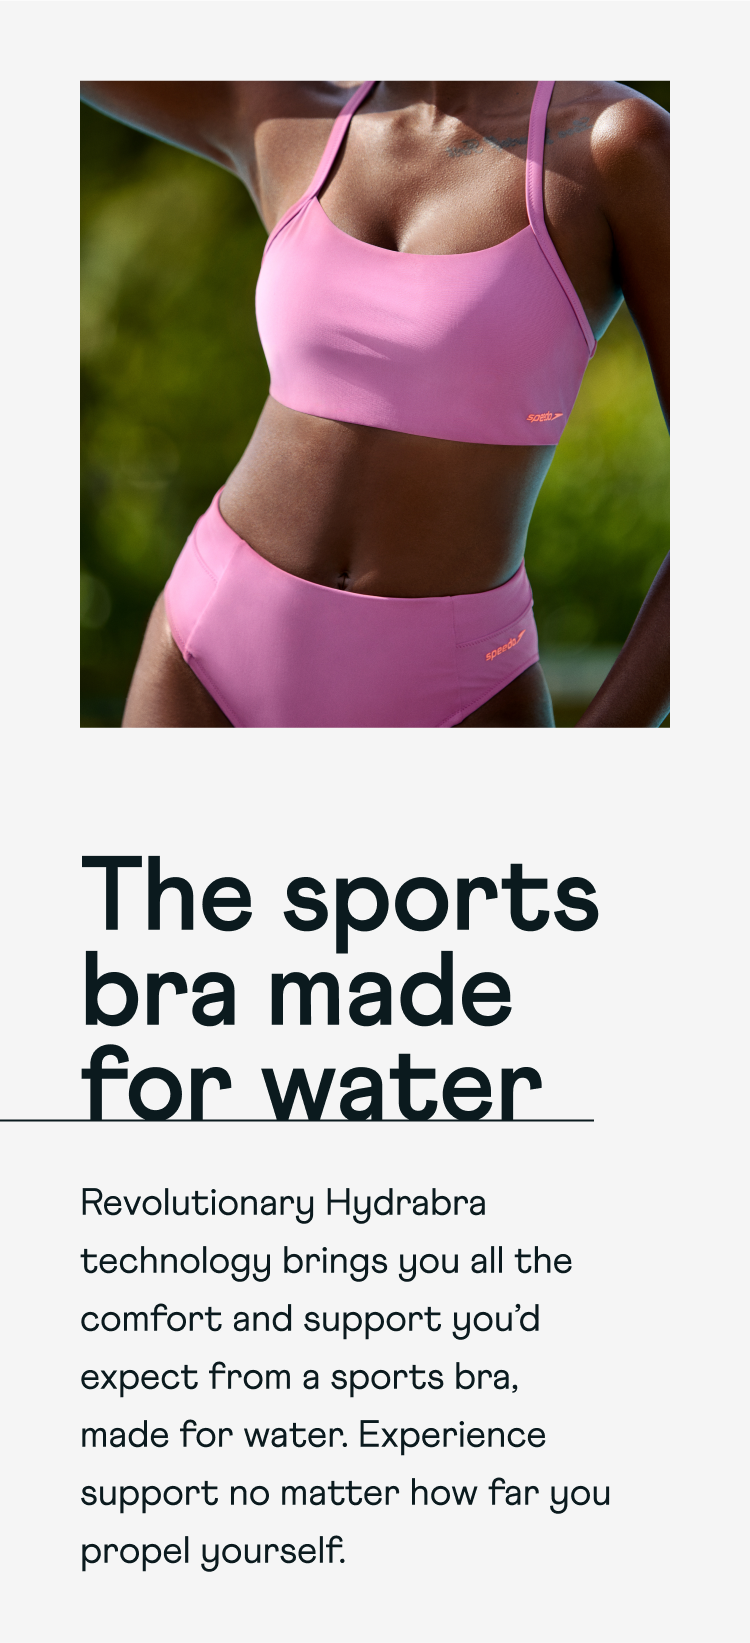 The sports bra made for water. Revolutionary Hydrabra technology brings you all the comfort and support you'd expect from a sports bra, made for water. Experience support no matter how far you propel yourself.